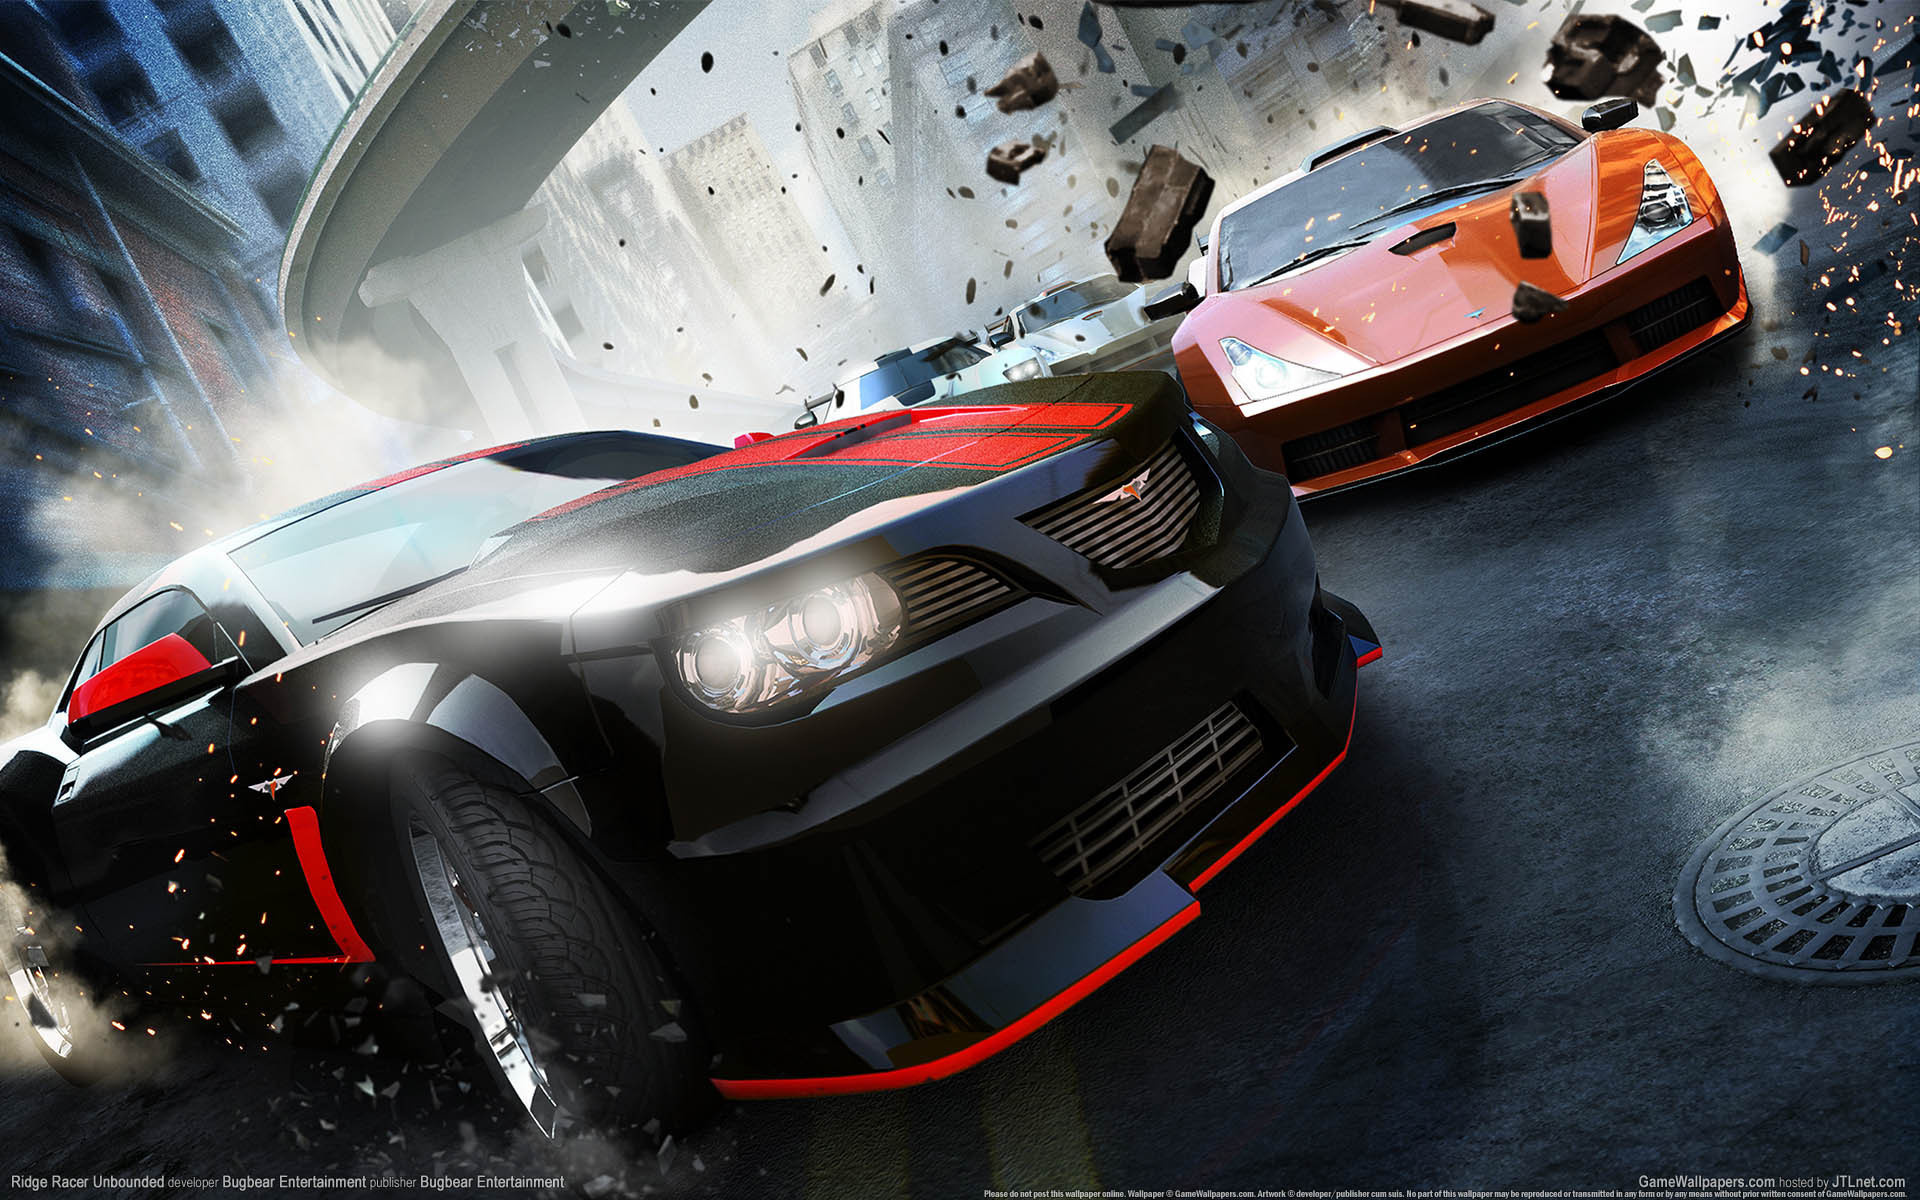 Machine, Stones, The City, Ridge Racer Unbounded, Speed, - Pc Games For Low Graphics Card - HD Wallpaper 